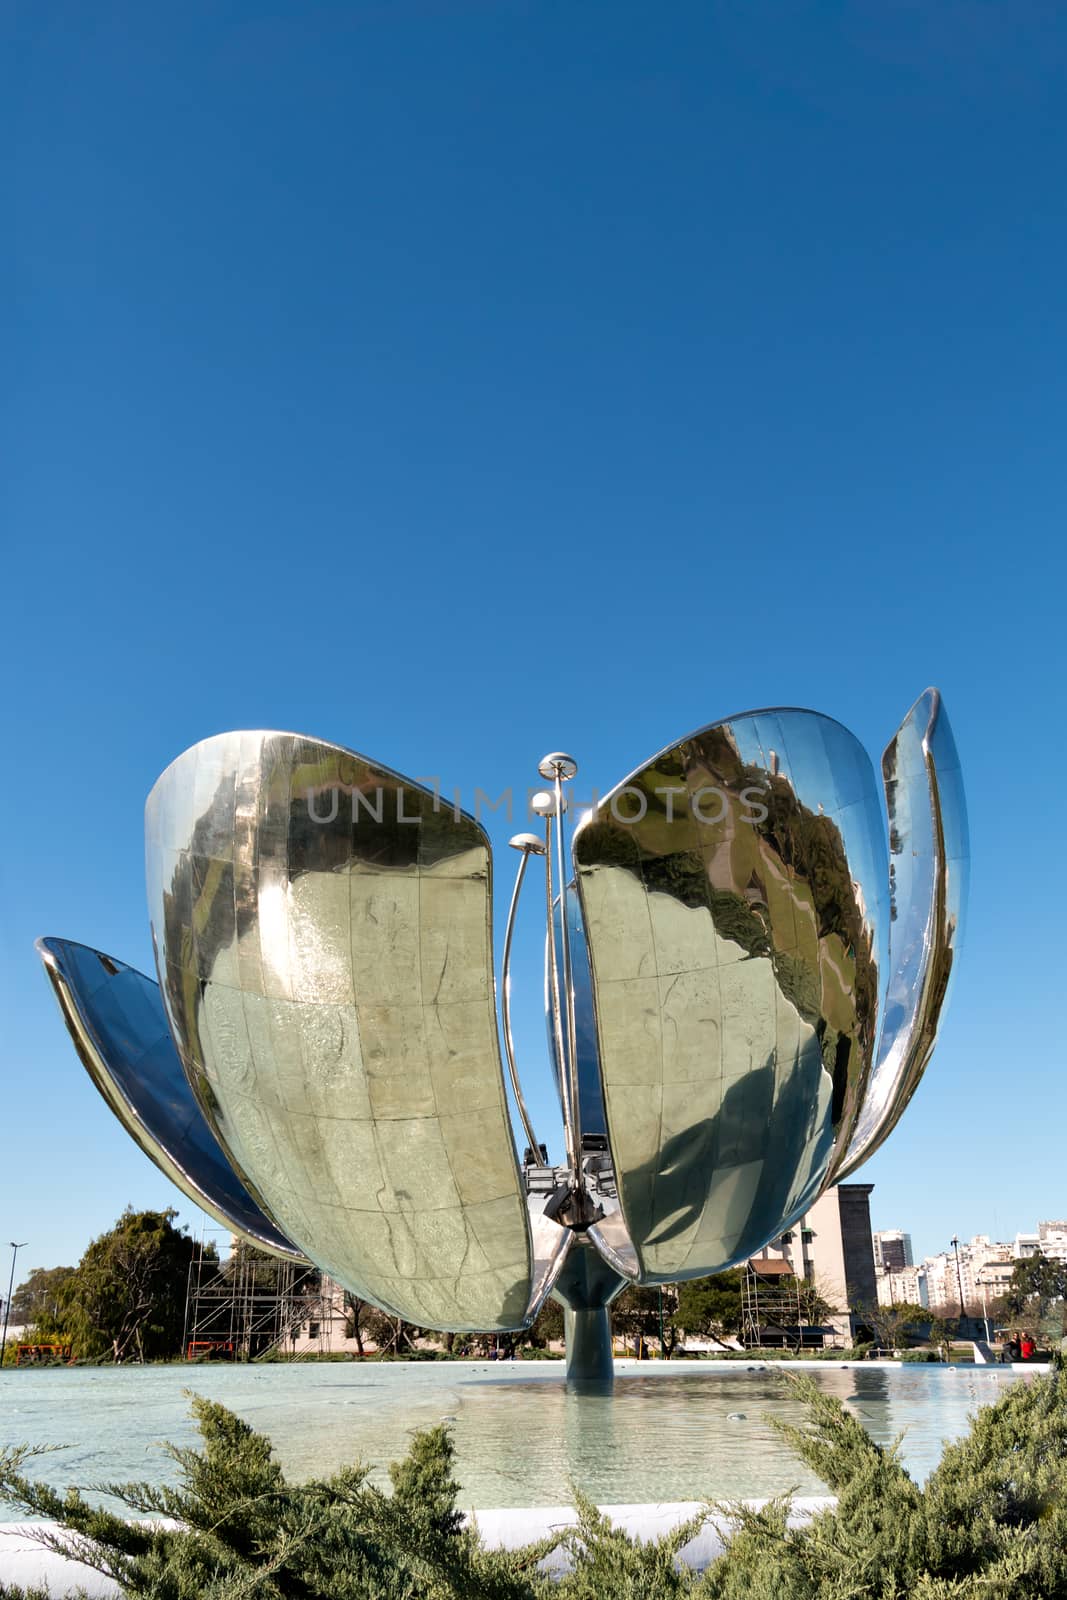 The Floralis Generica is a metal sculpture in the square of the United Nations and was designed from Eduardo Catalano